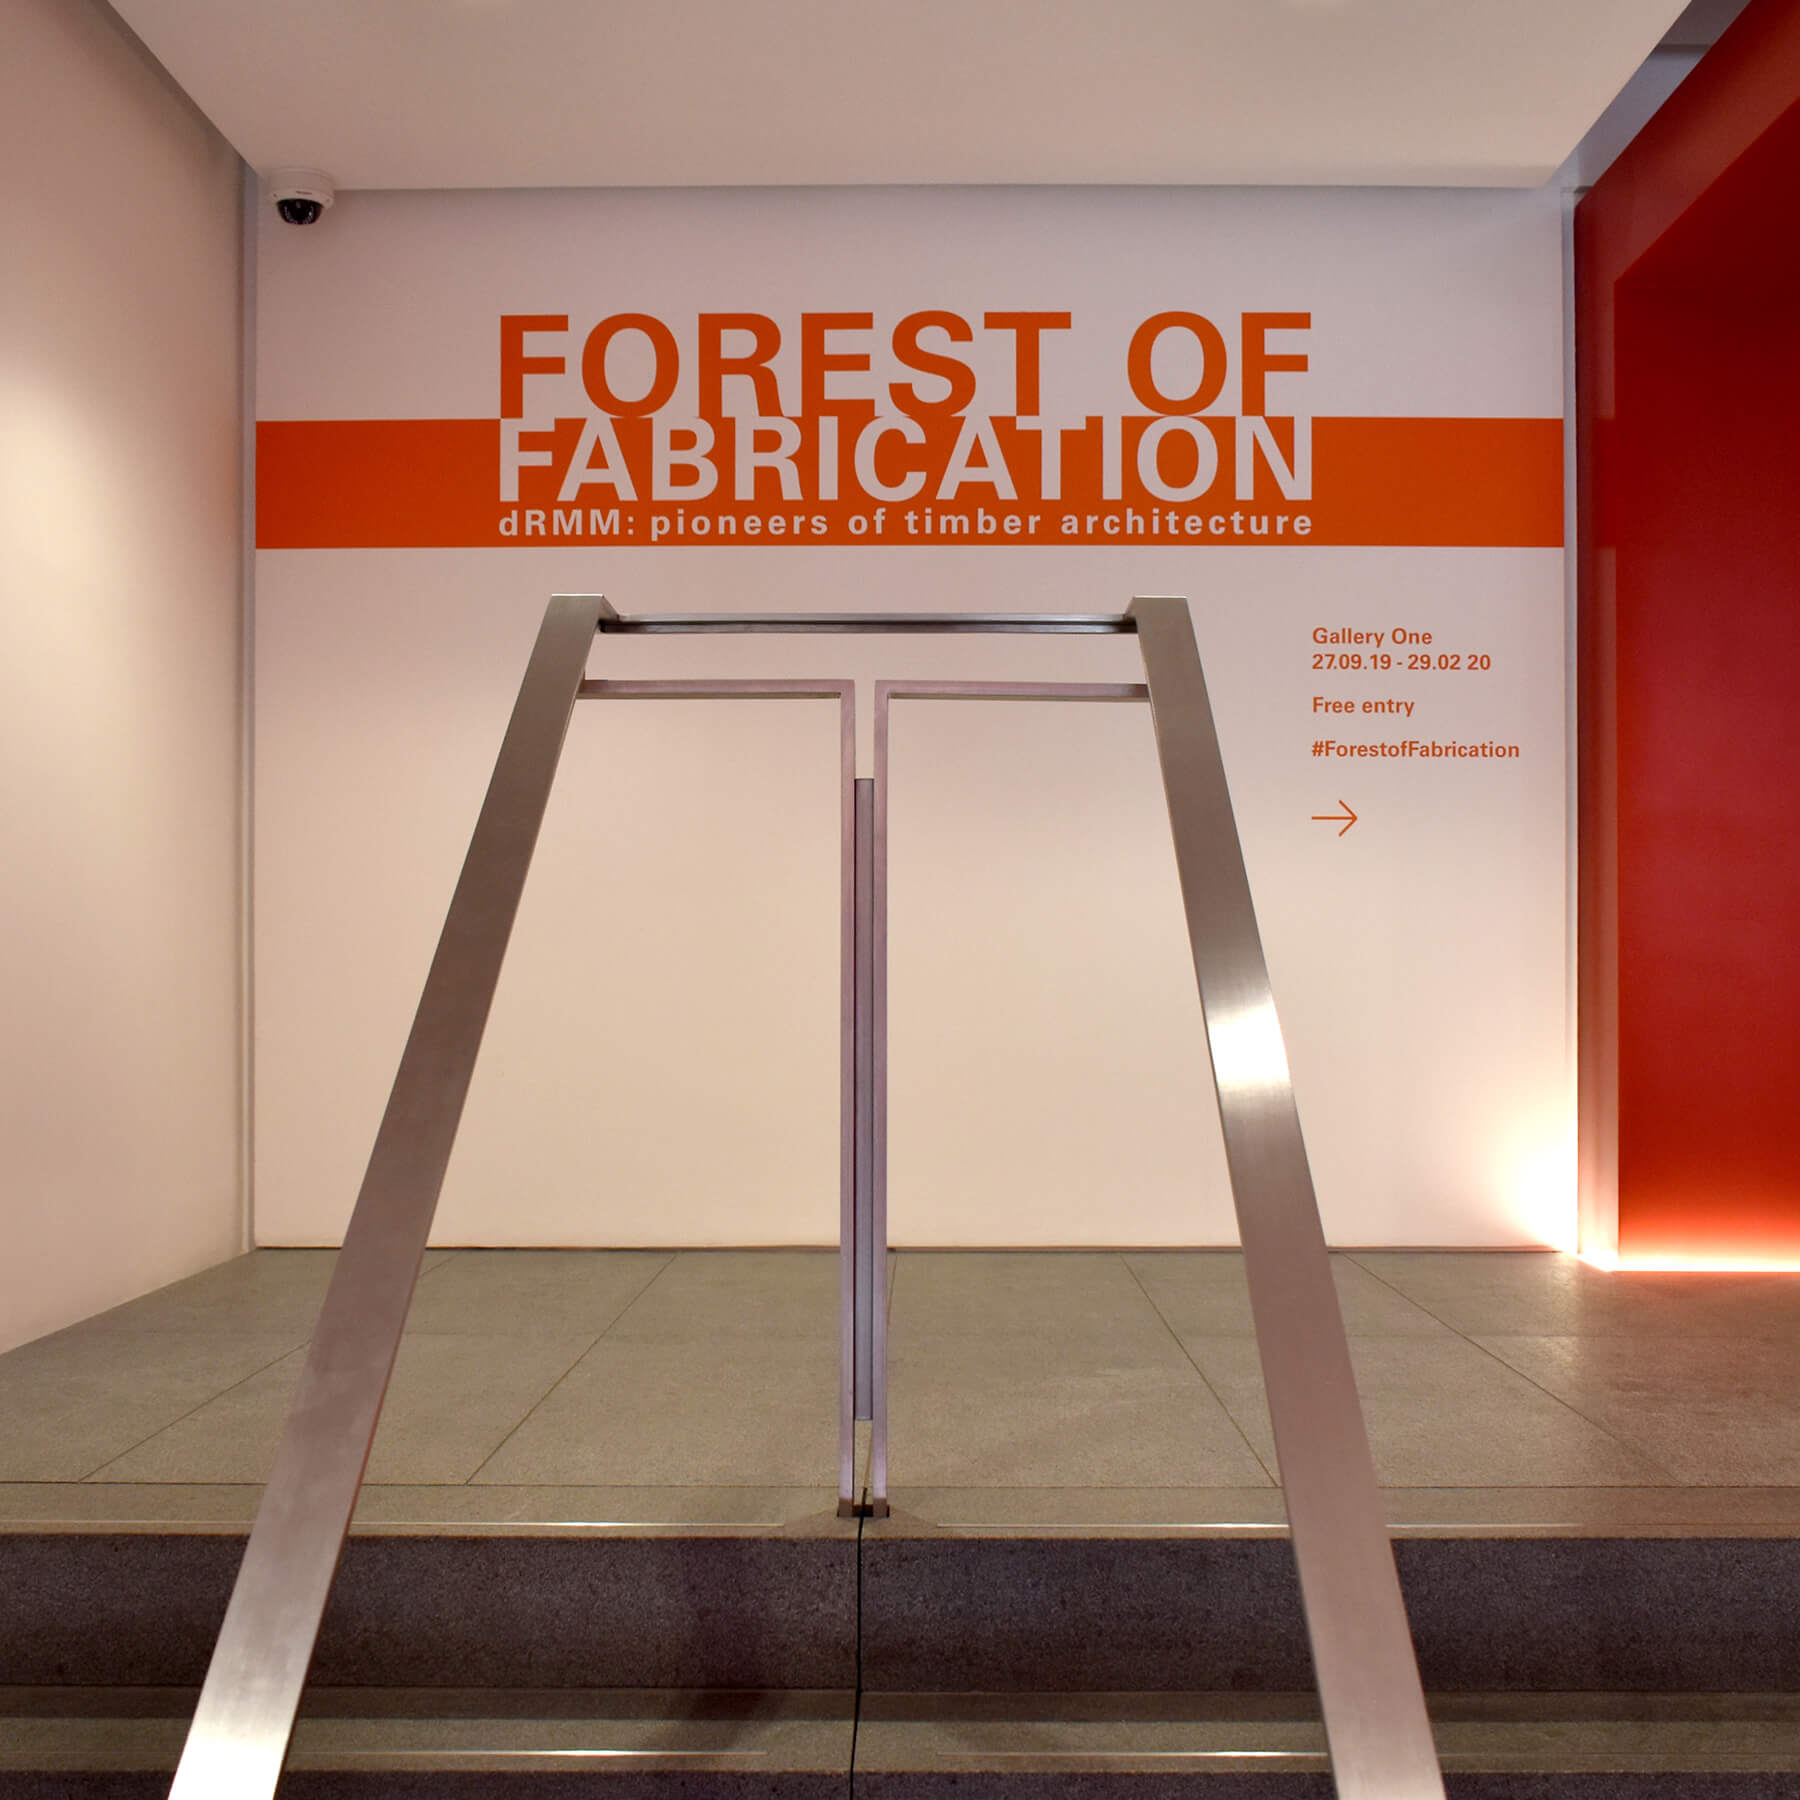 Forest of Fabrication RIBA North Signage